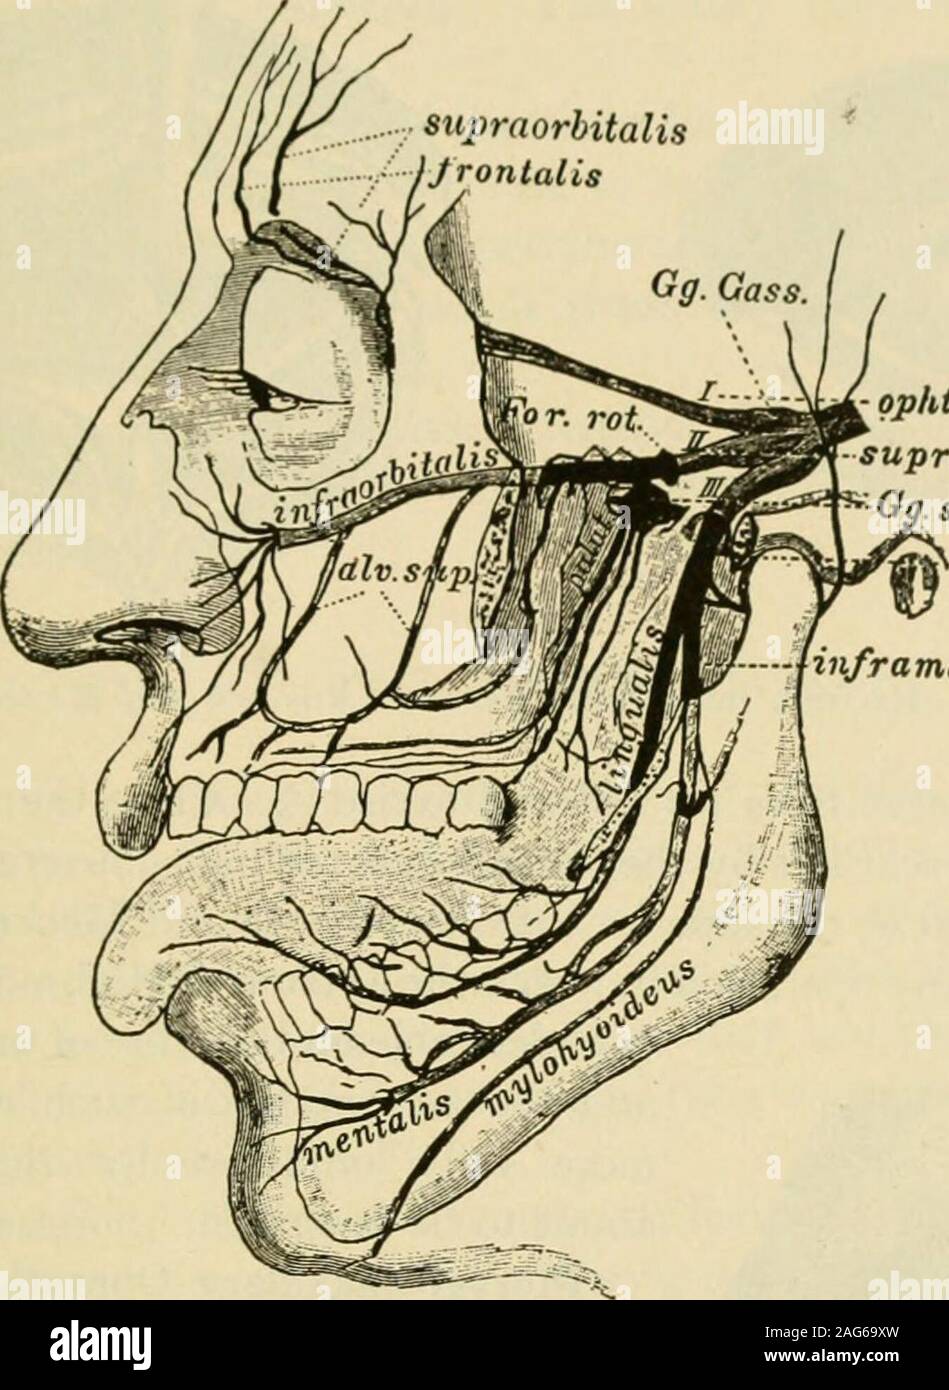 . Manual of operative surgery. w it. It ison a line drawn from the supraorbital notch to a point between the two bicuspids.Make a curved transverse incision parallel and close to the lower margin of theorbit. Divide the orbicularis muscle in a direction parallel to its fibres. Exposethe nerve as it leaves the infraorbital foramen (Fig. 49). Seize the nerve inforceps, and by traction and torsion extract as much of its trunk from its bonycanal as is possible. In the same fashion extract as much of its terminal twigsas possible from the soft structures in which they run. It is extraordinary howmu Stock Photo